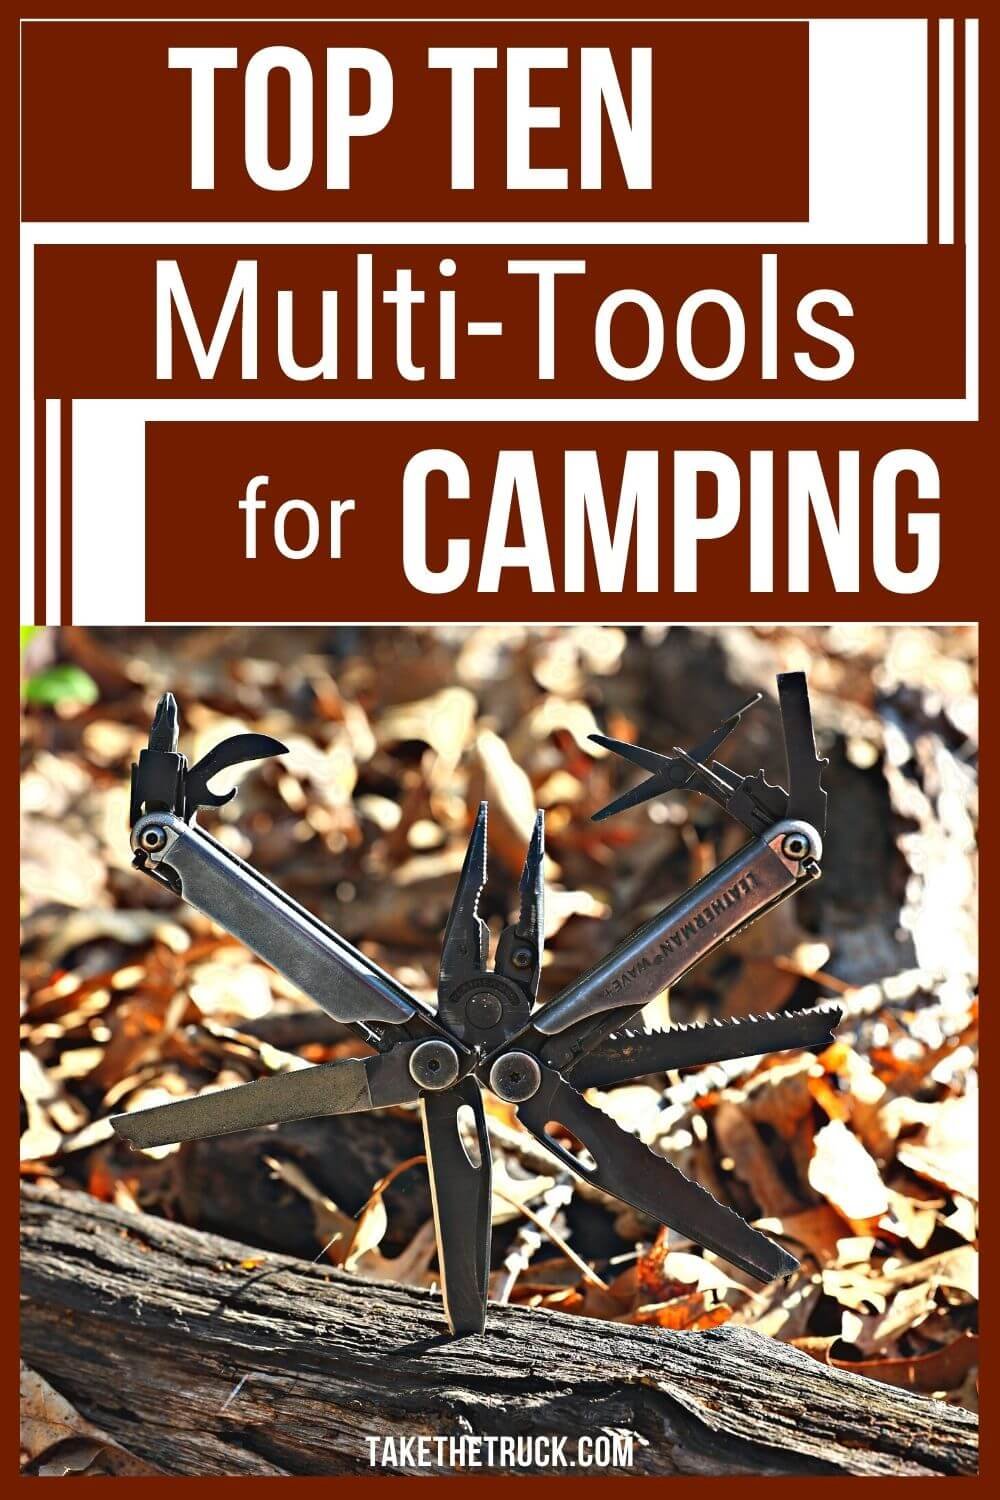 10 top camping multi tool suggestions and multitools for everyday carry. Multi tool knife suggestions, leatherman multitool for everyday carry, and multitools for camping gear.